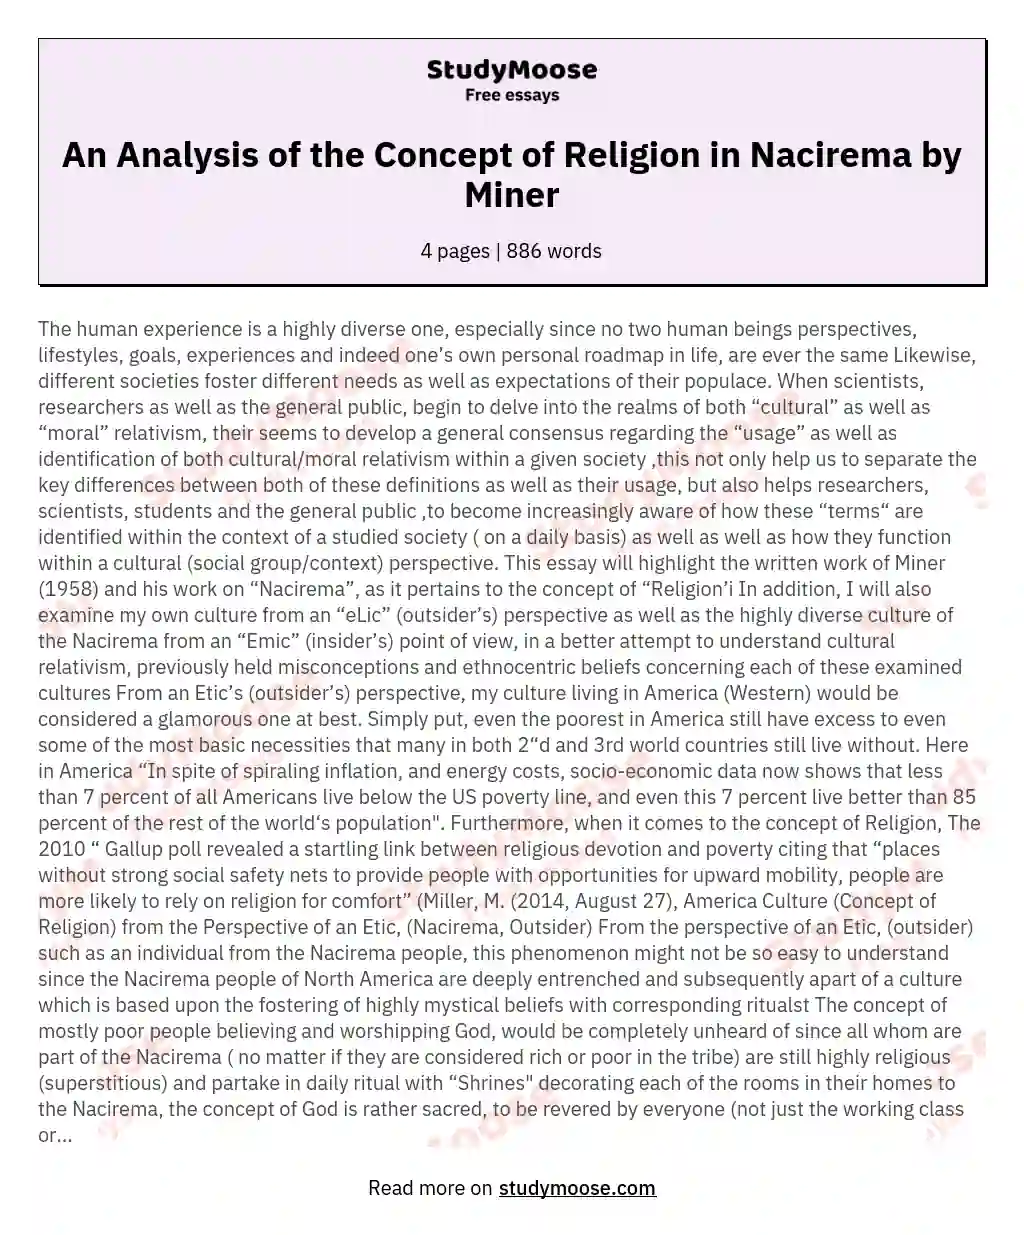 An Analysis of the Concept of Religion in Nacirema by Miner essay